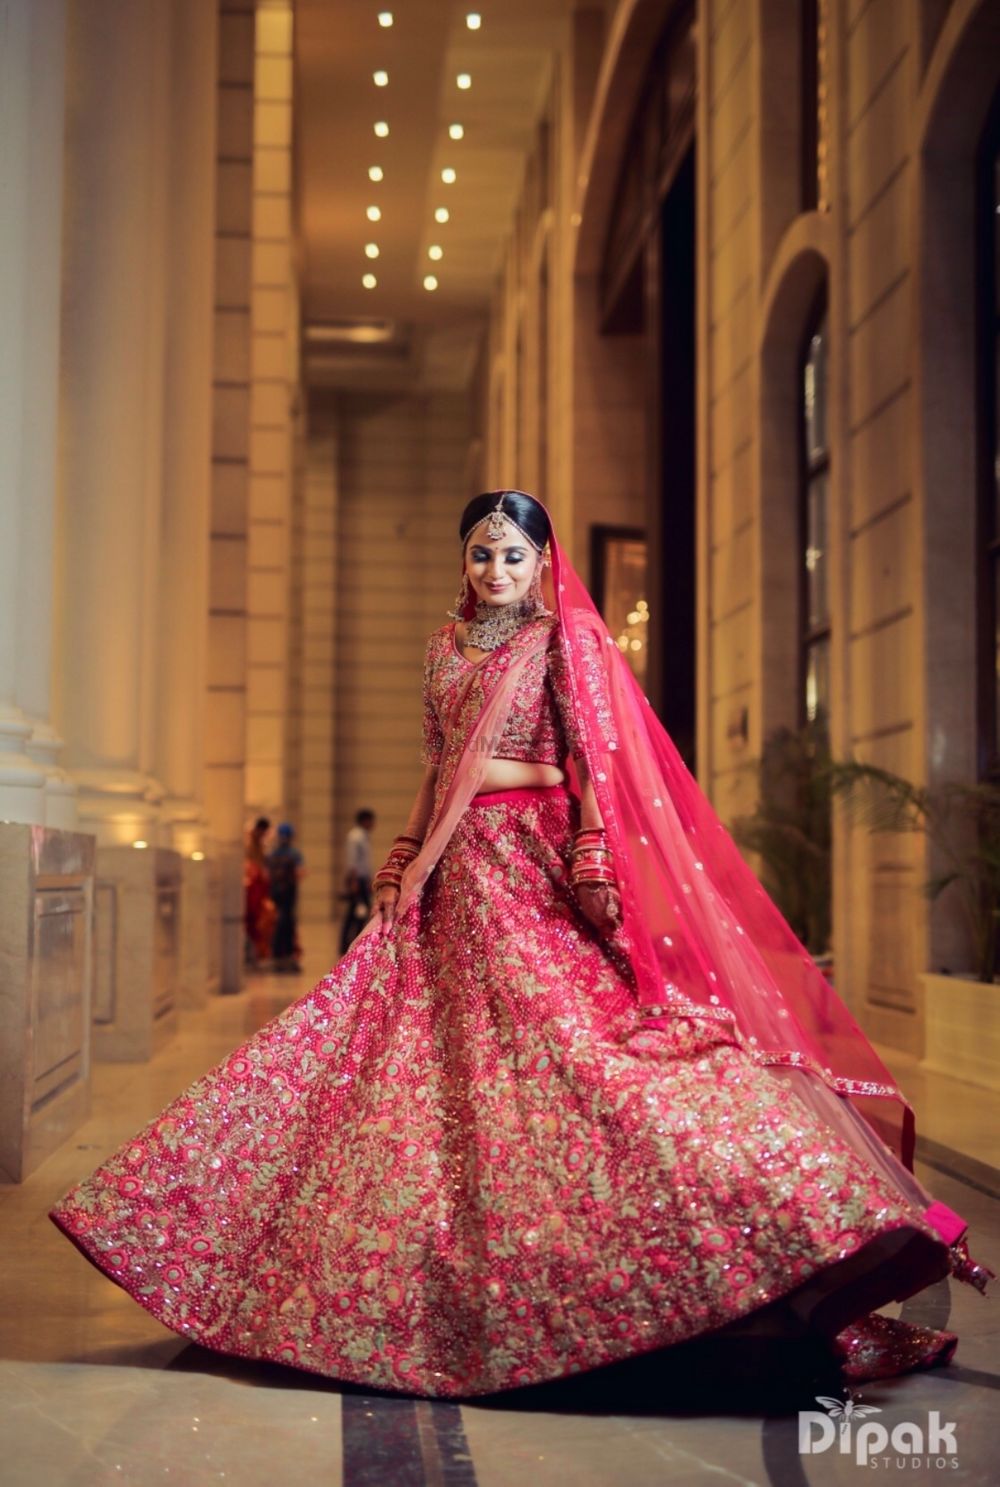 Photo of Twirling bride shot in a red and gold lehenga